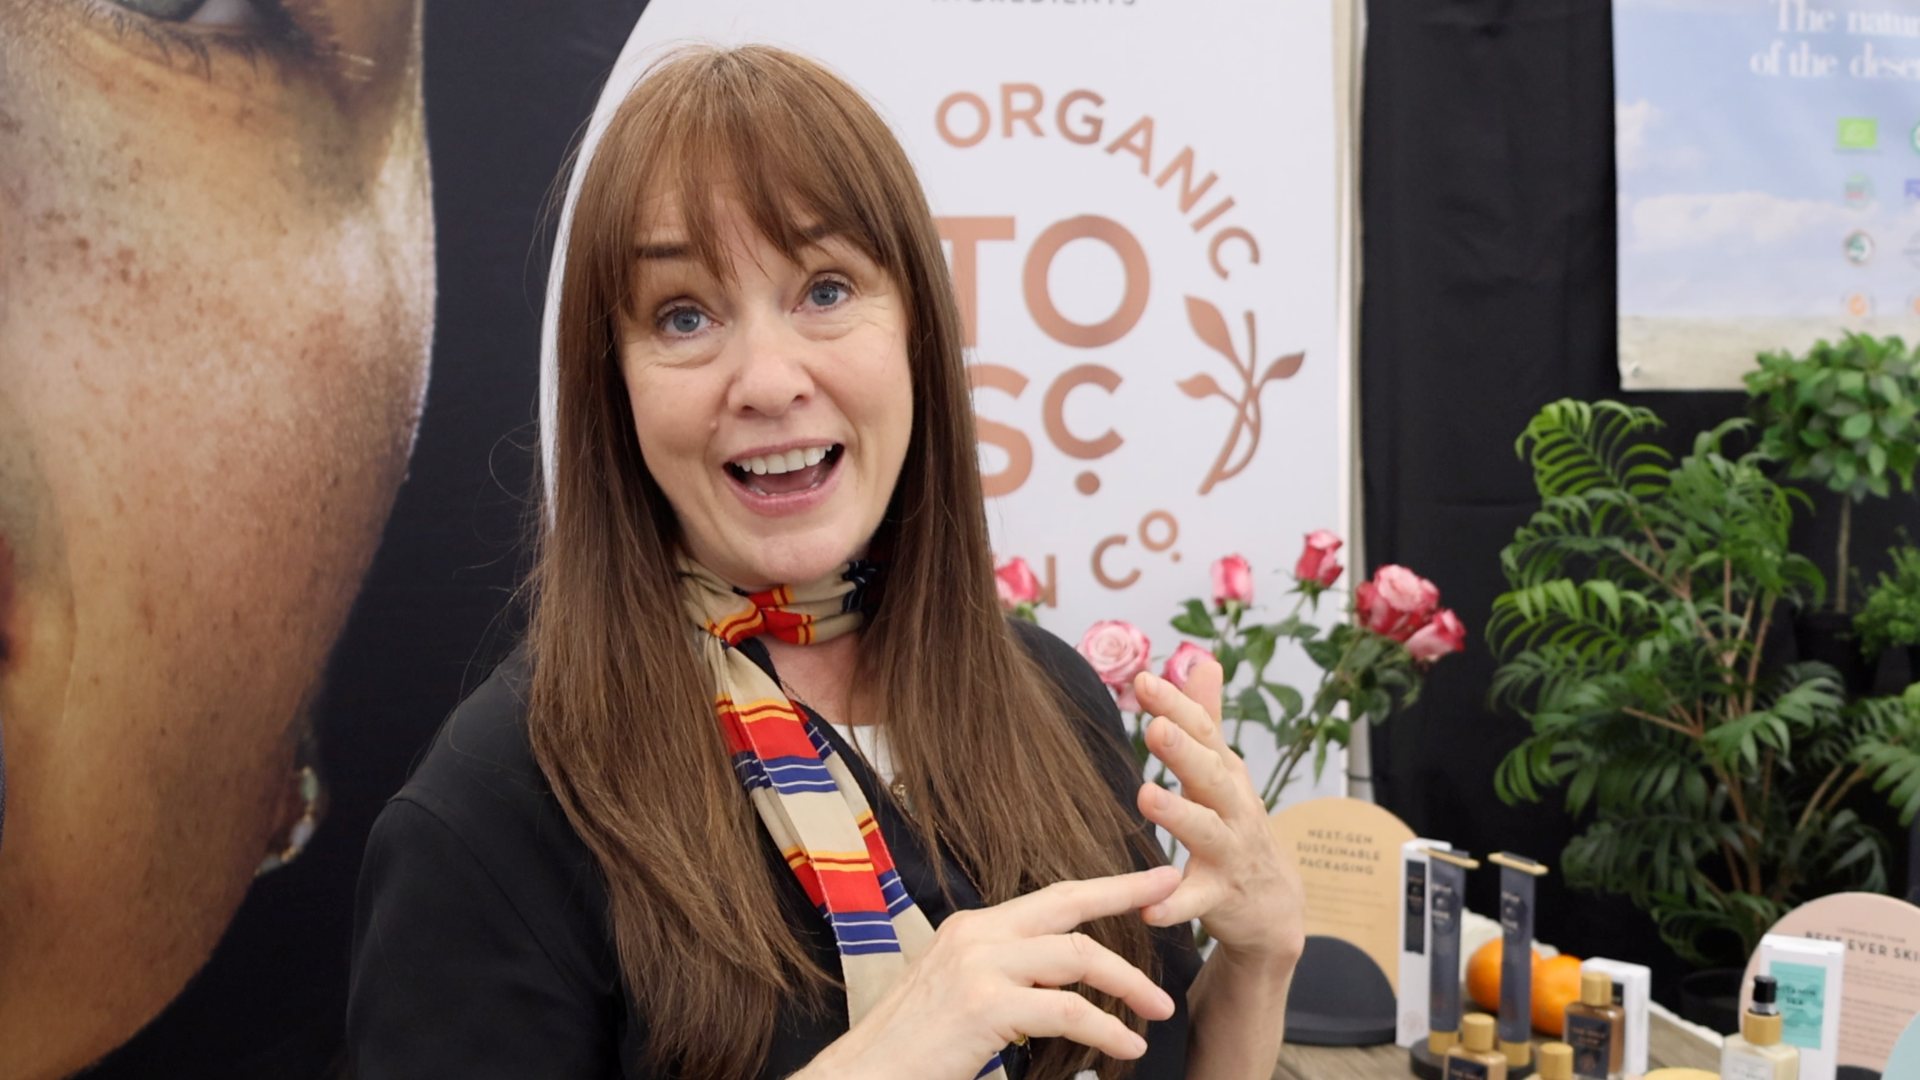 Organic Skin Co expo west 2023